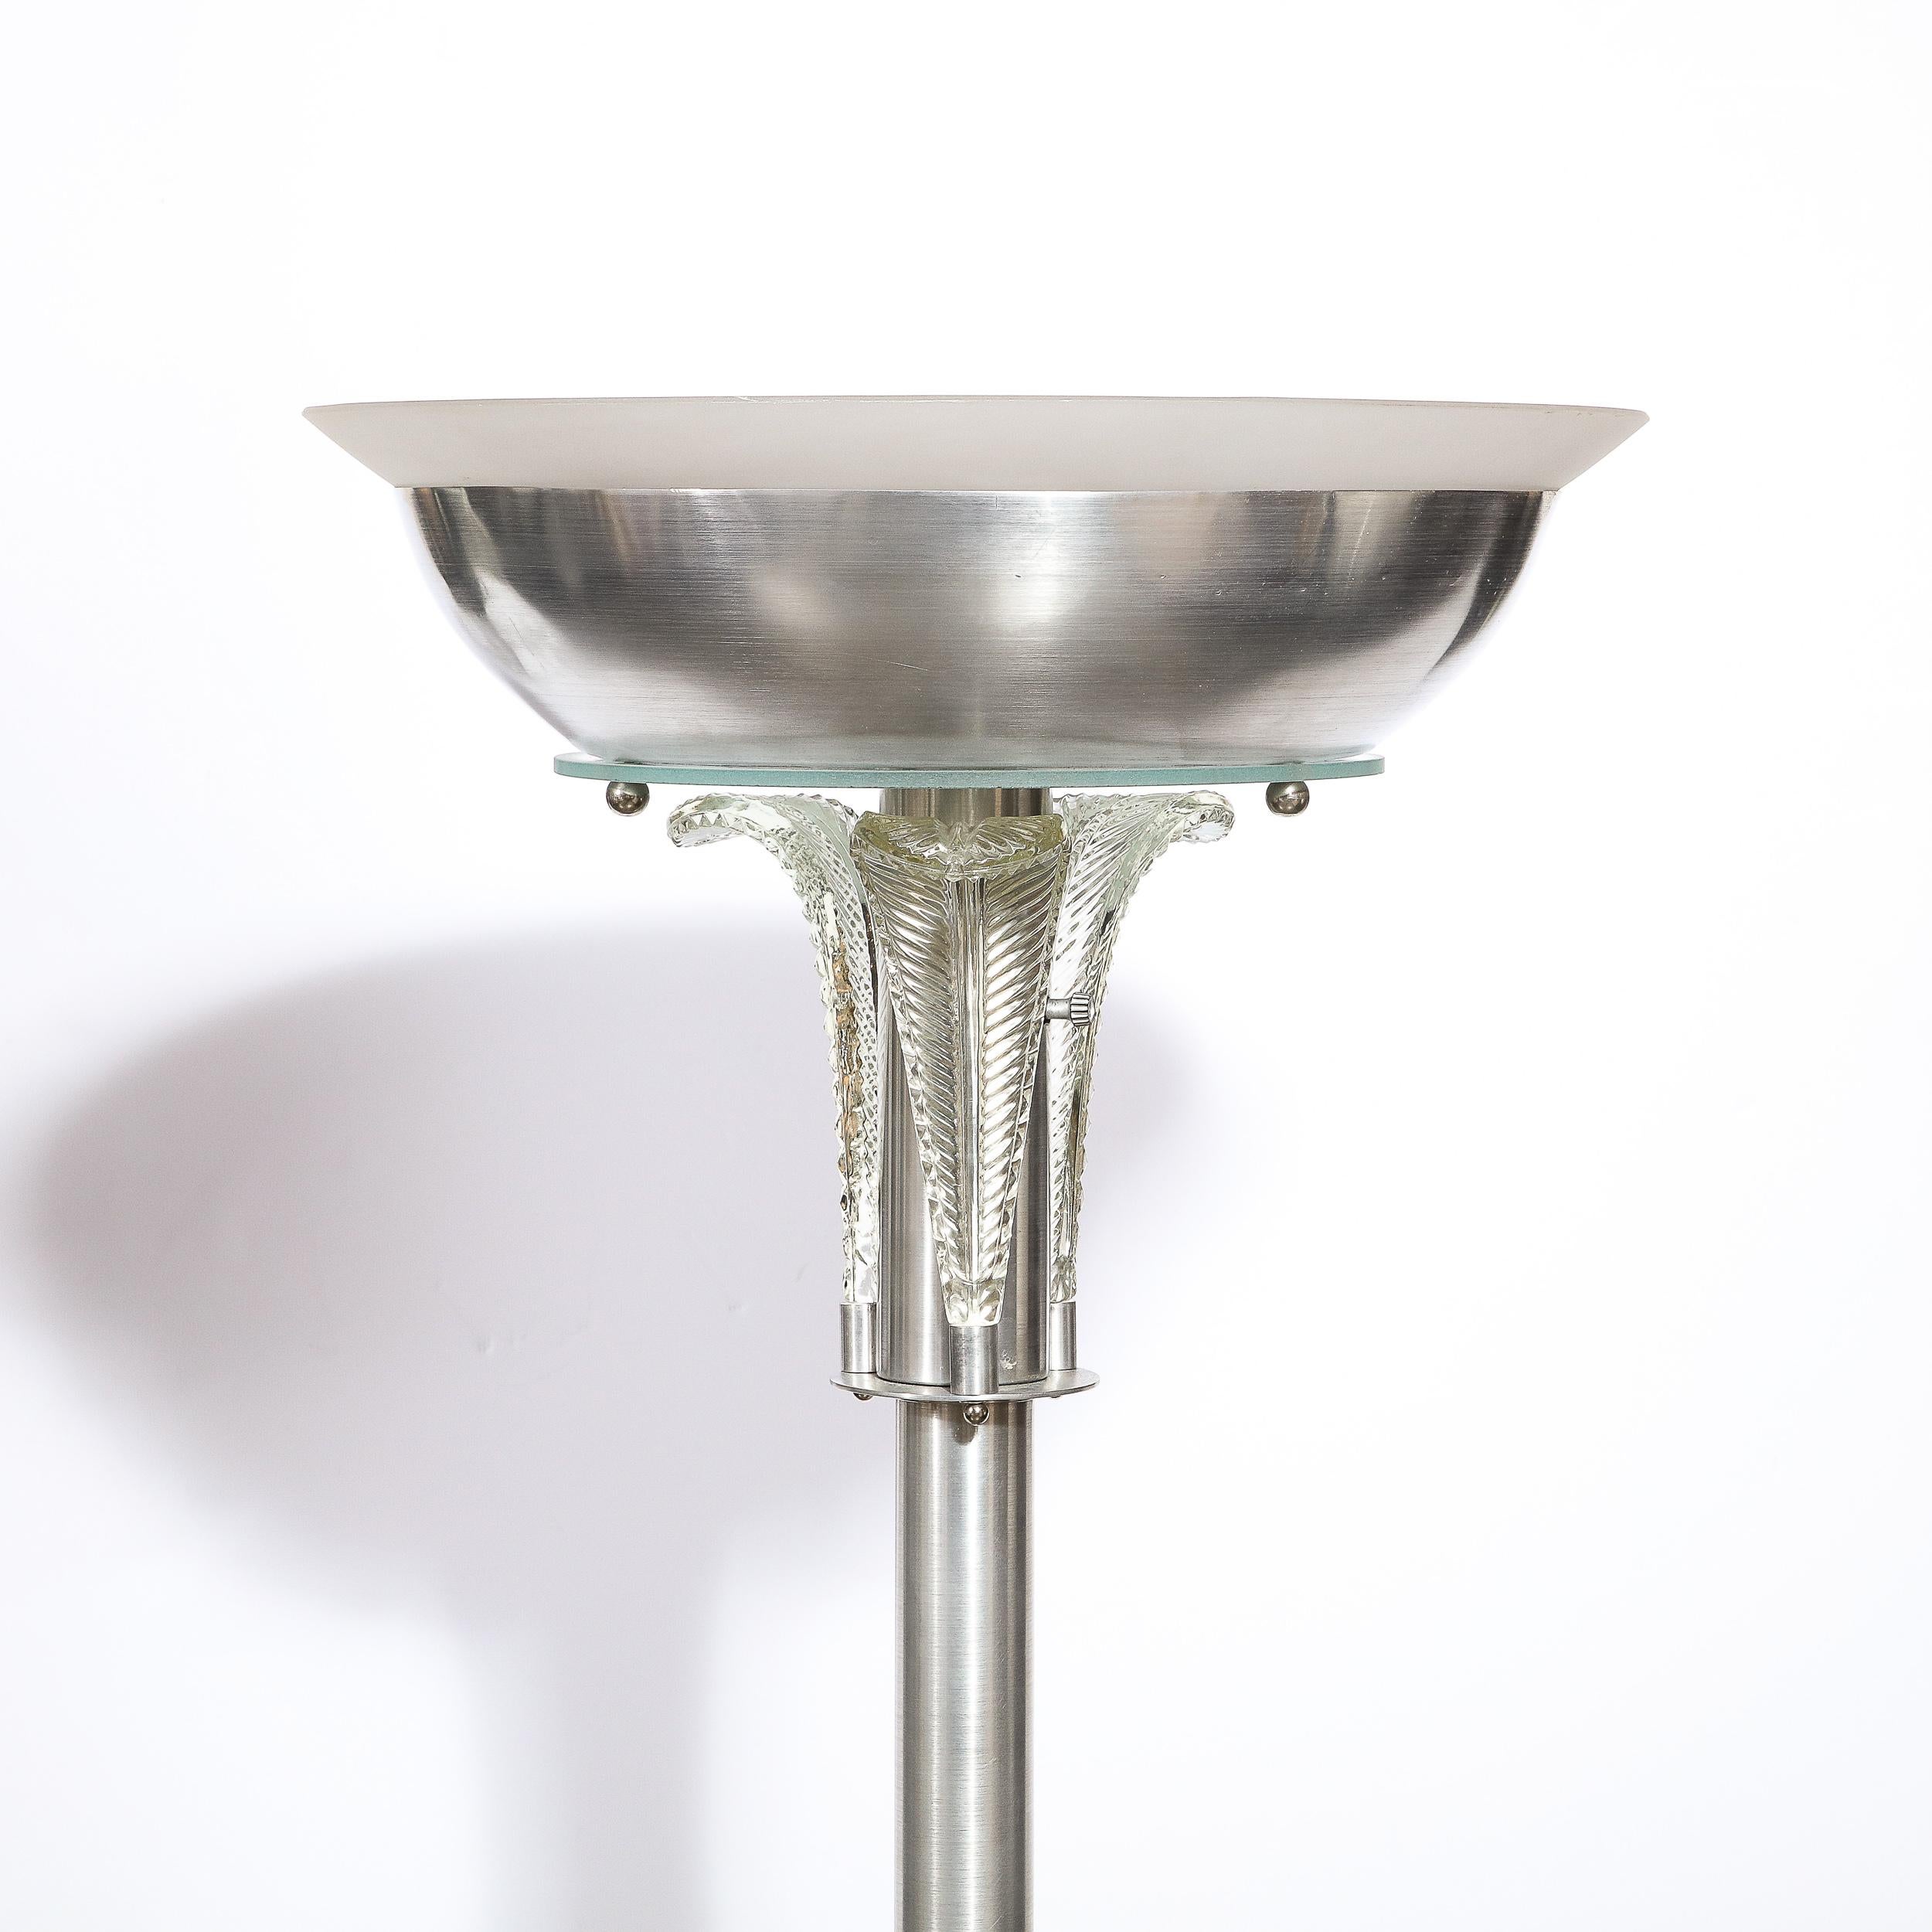 This stunning Art Deco torchiere was realized by the legendary Walter Von Nessen in the United States circa 1940. Executed in polished aluminum (the material for which Von Nessen is most renowned) the torchiere offers a volumetric circular base from